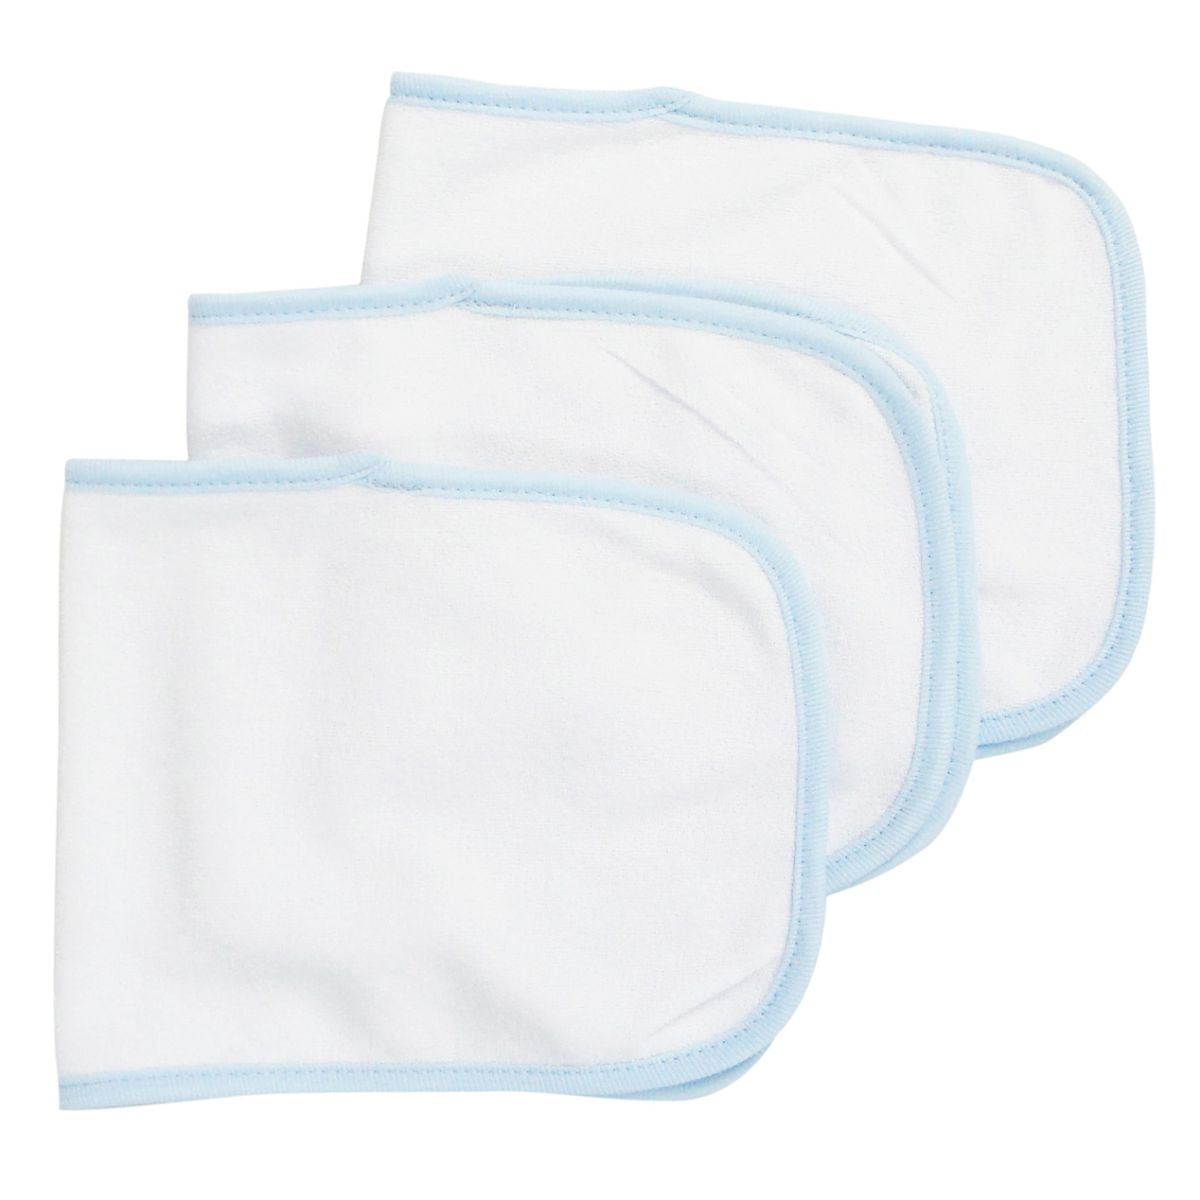 12.25 X 7.5 In. Baby Burpcloth, White With Blue Trim - Pack Of 3